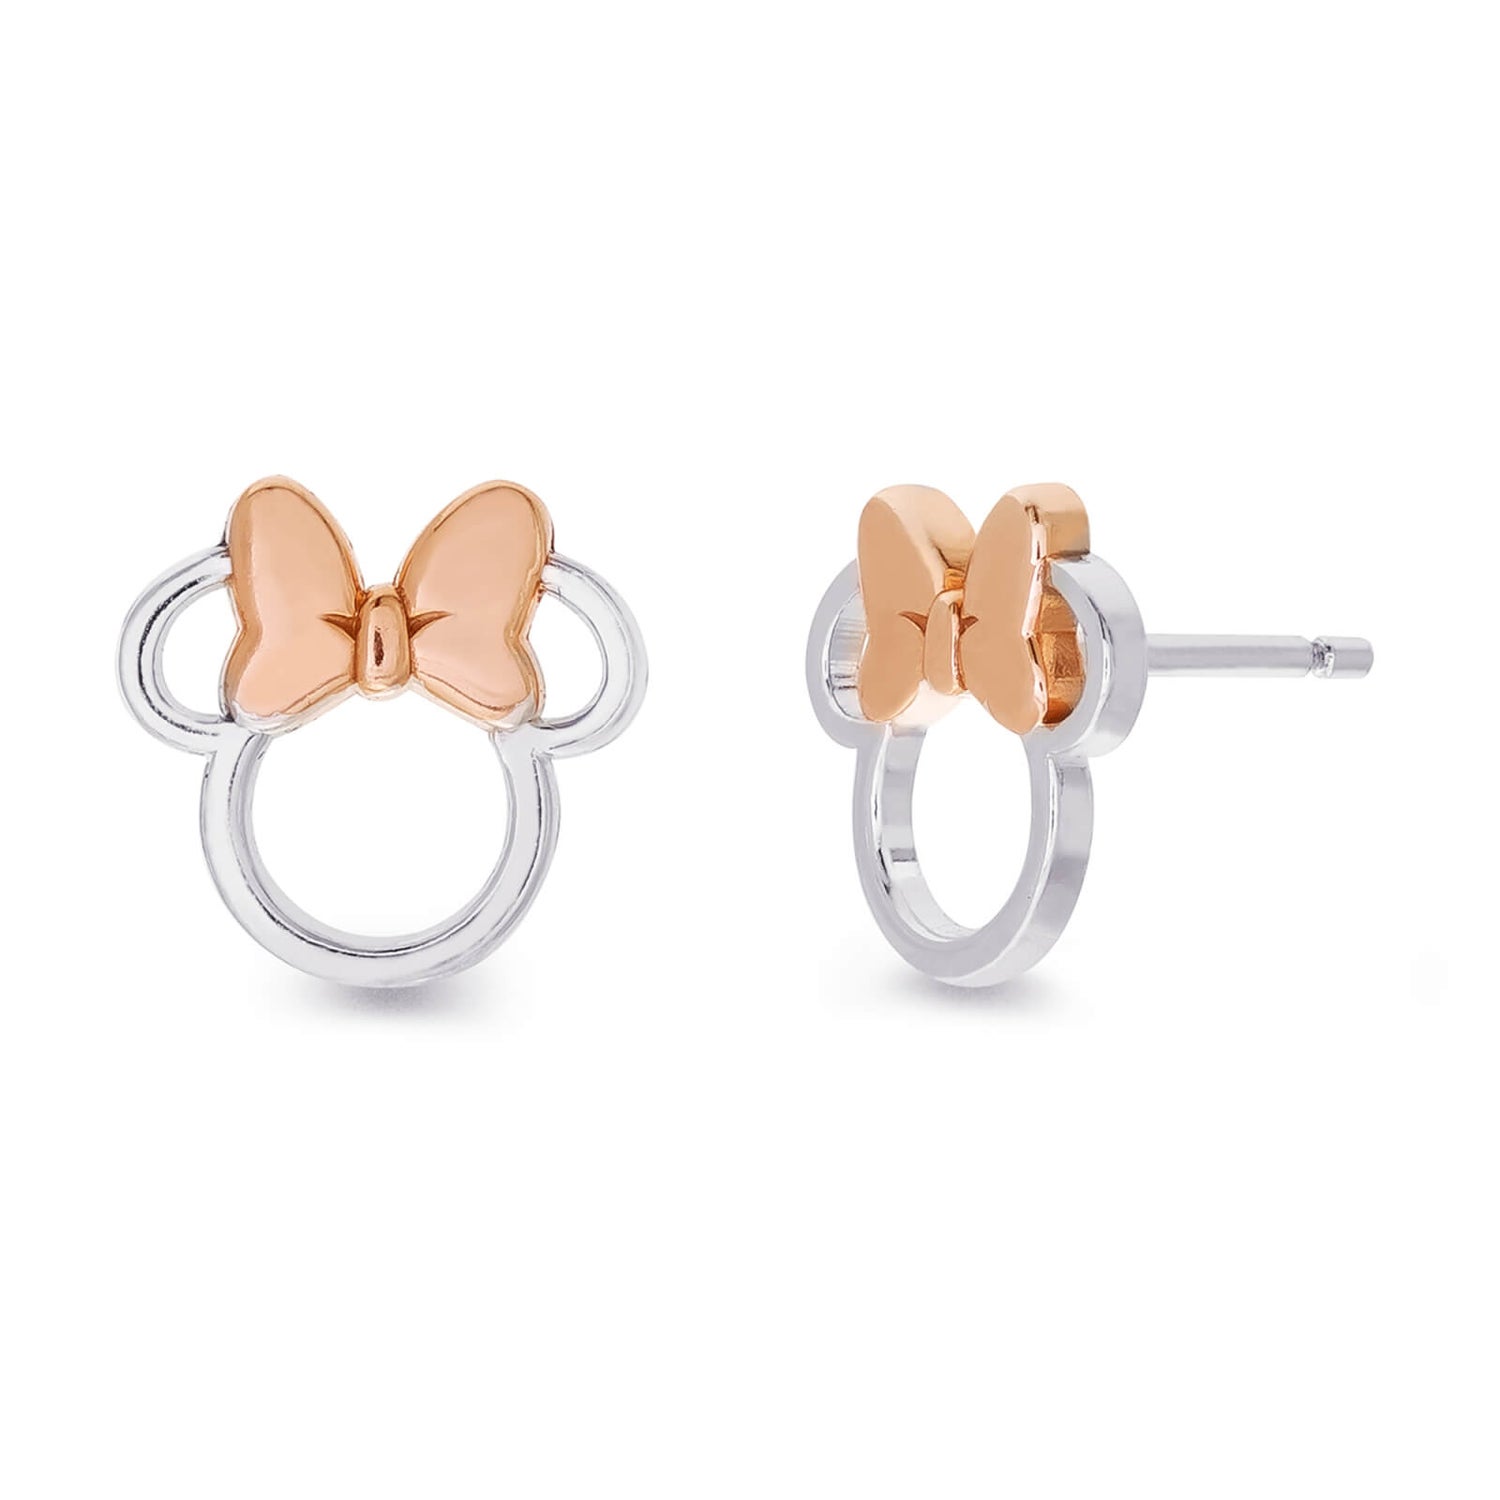 Disney Minnie Mouse silver and rose gold Sterling silver Stud Earrings